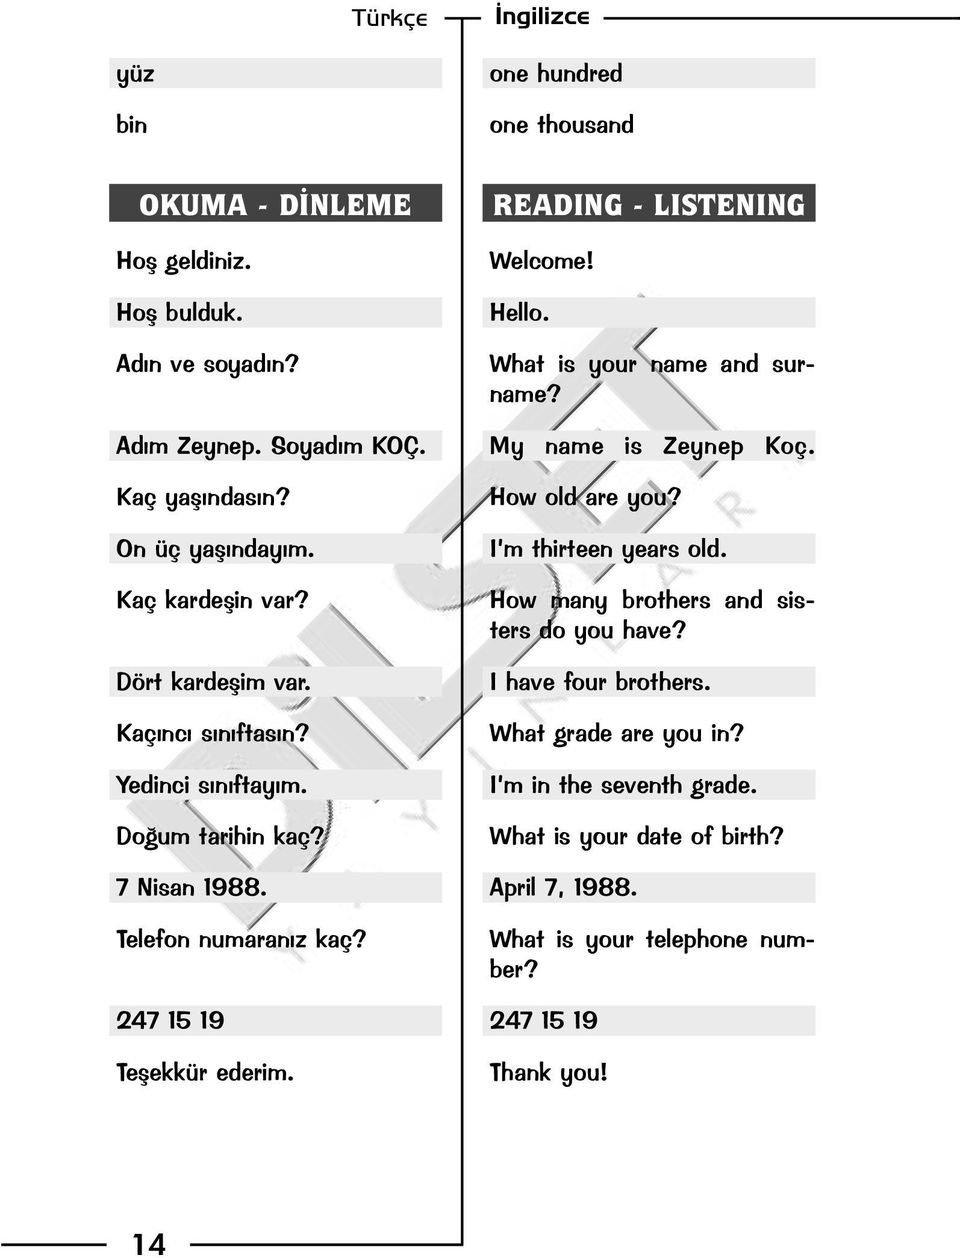 READING - LISTENING Welcome! Hello. What is your name and surname? My name is Zeynep Koç. How old are you? I m thirteen years old.